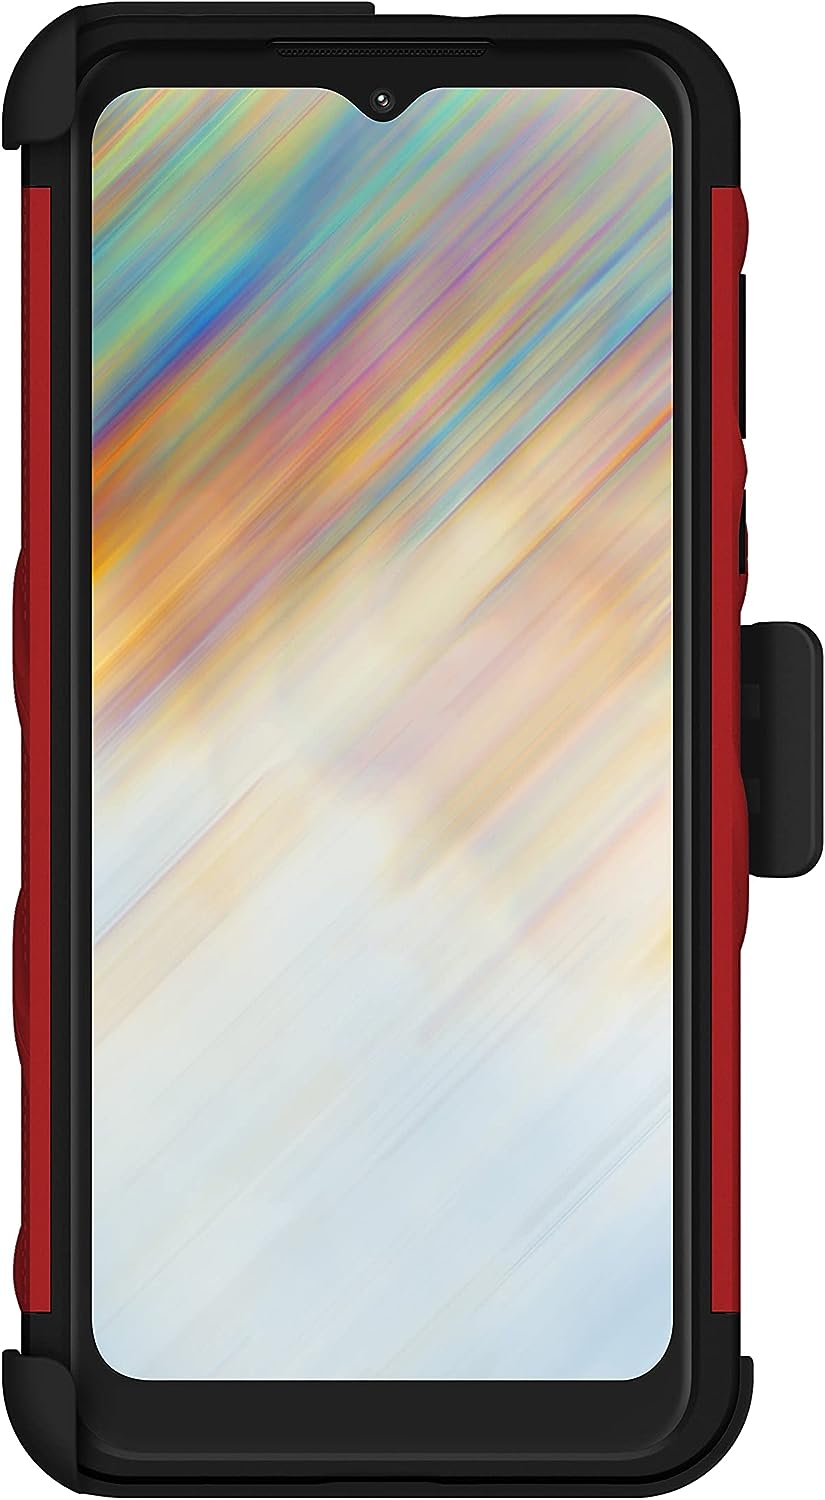 ZIZO Bolt Moto G Play 2023 Holster Case with Tempered Glass, Built-in Kickstand & Lanyard (3 Colors)